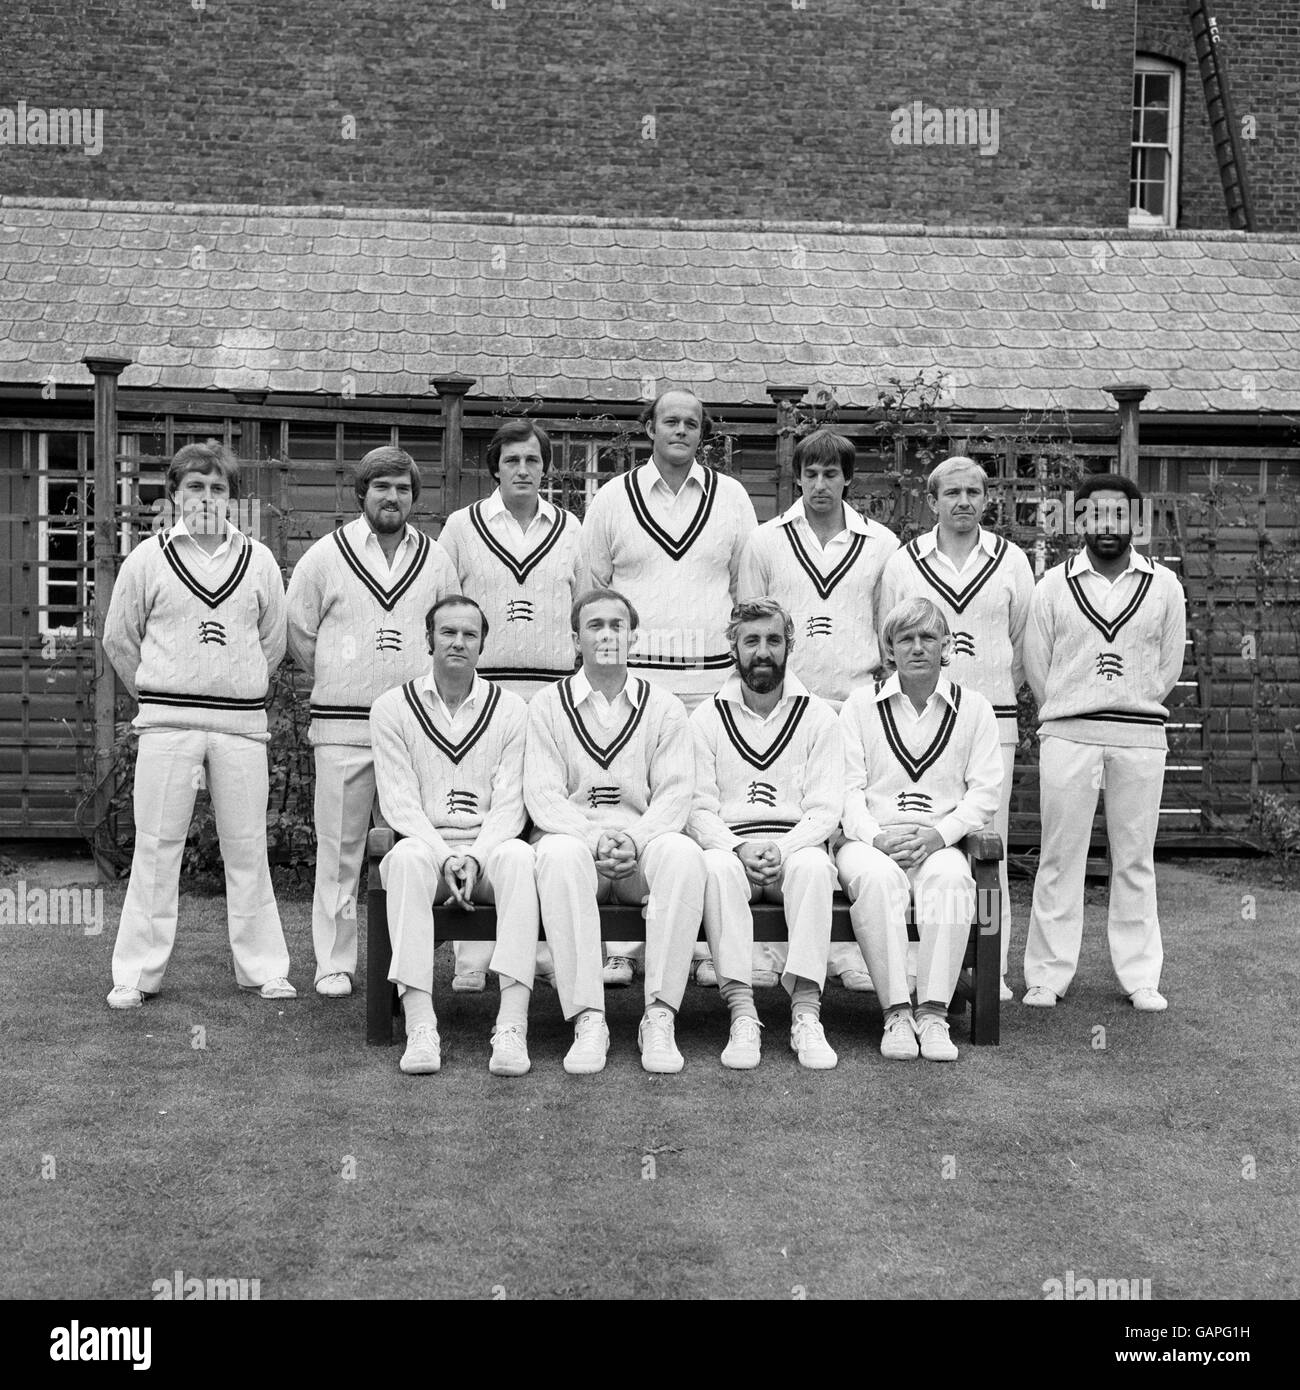 Middlesex Cricket Club's 1st Team group at Lord's Cricket Ground. Left top right, back row, Ian Gould, Mike Gatting, John Emburey, Vintcent van der Bijl, Mike Selvey, Graham Barlow and Roland Butcher. Left to right, front row, Mike Smith, Phil Edmonds, Mike Brearley and Clive Radley. Stock Photo